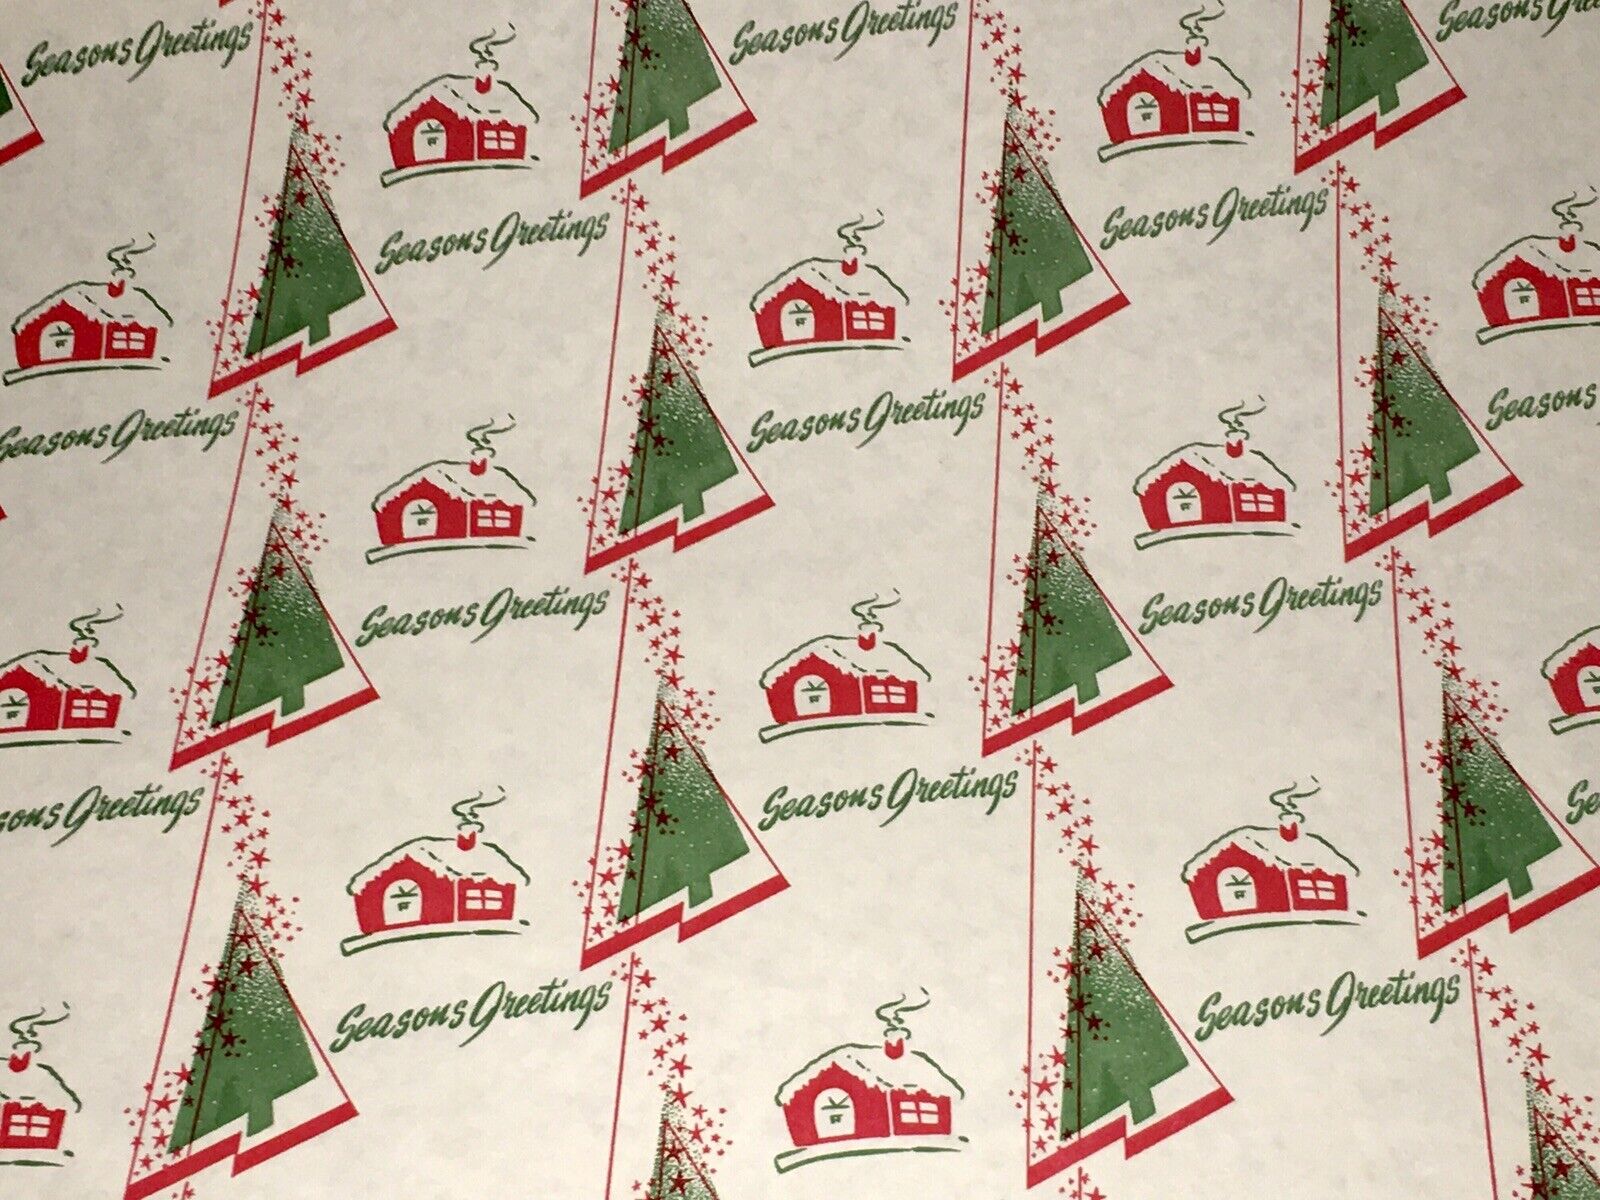 VTG CHRISTMAS 1950 WRAPPING PAPER 2 YARDS SEASONS GREETINGS WINTER CABIN TREES